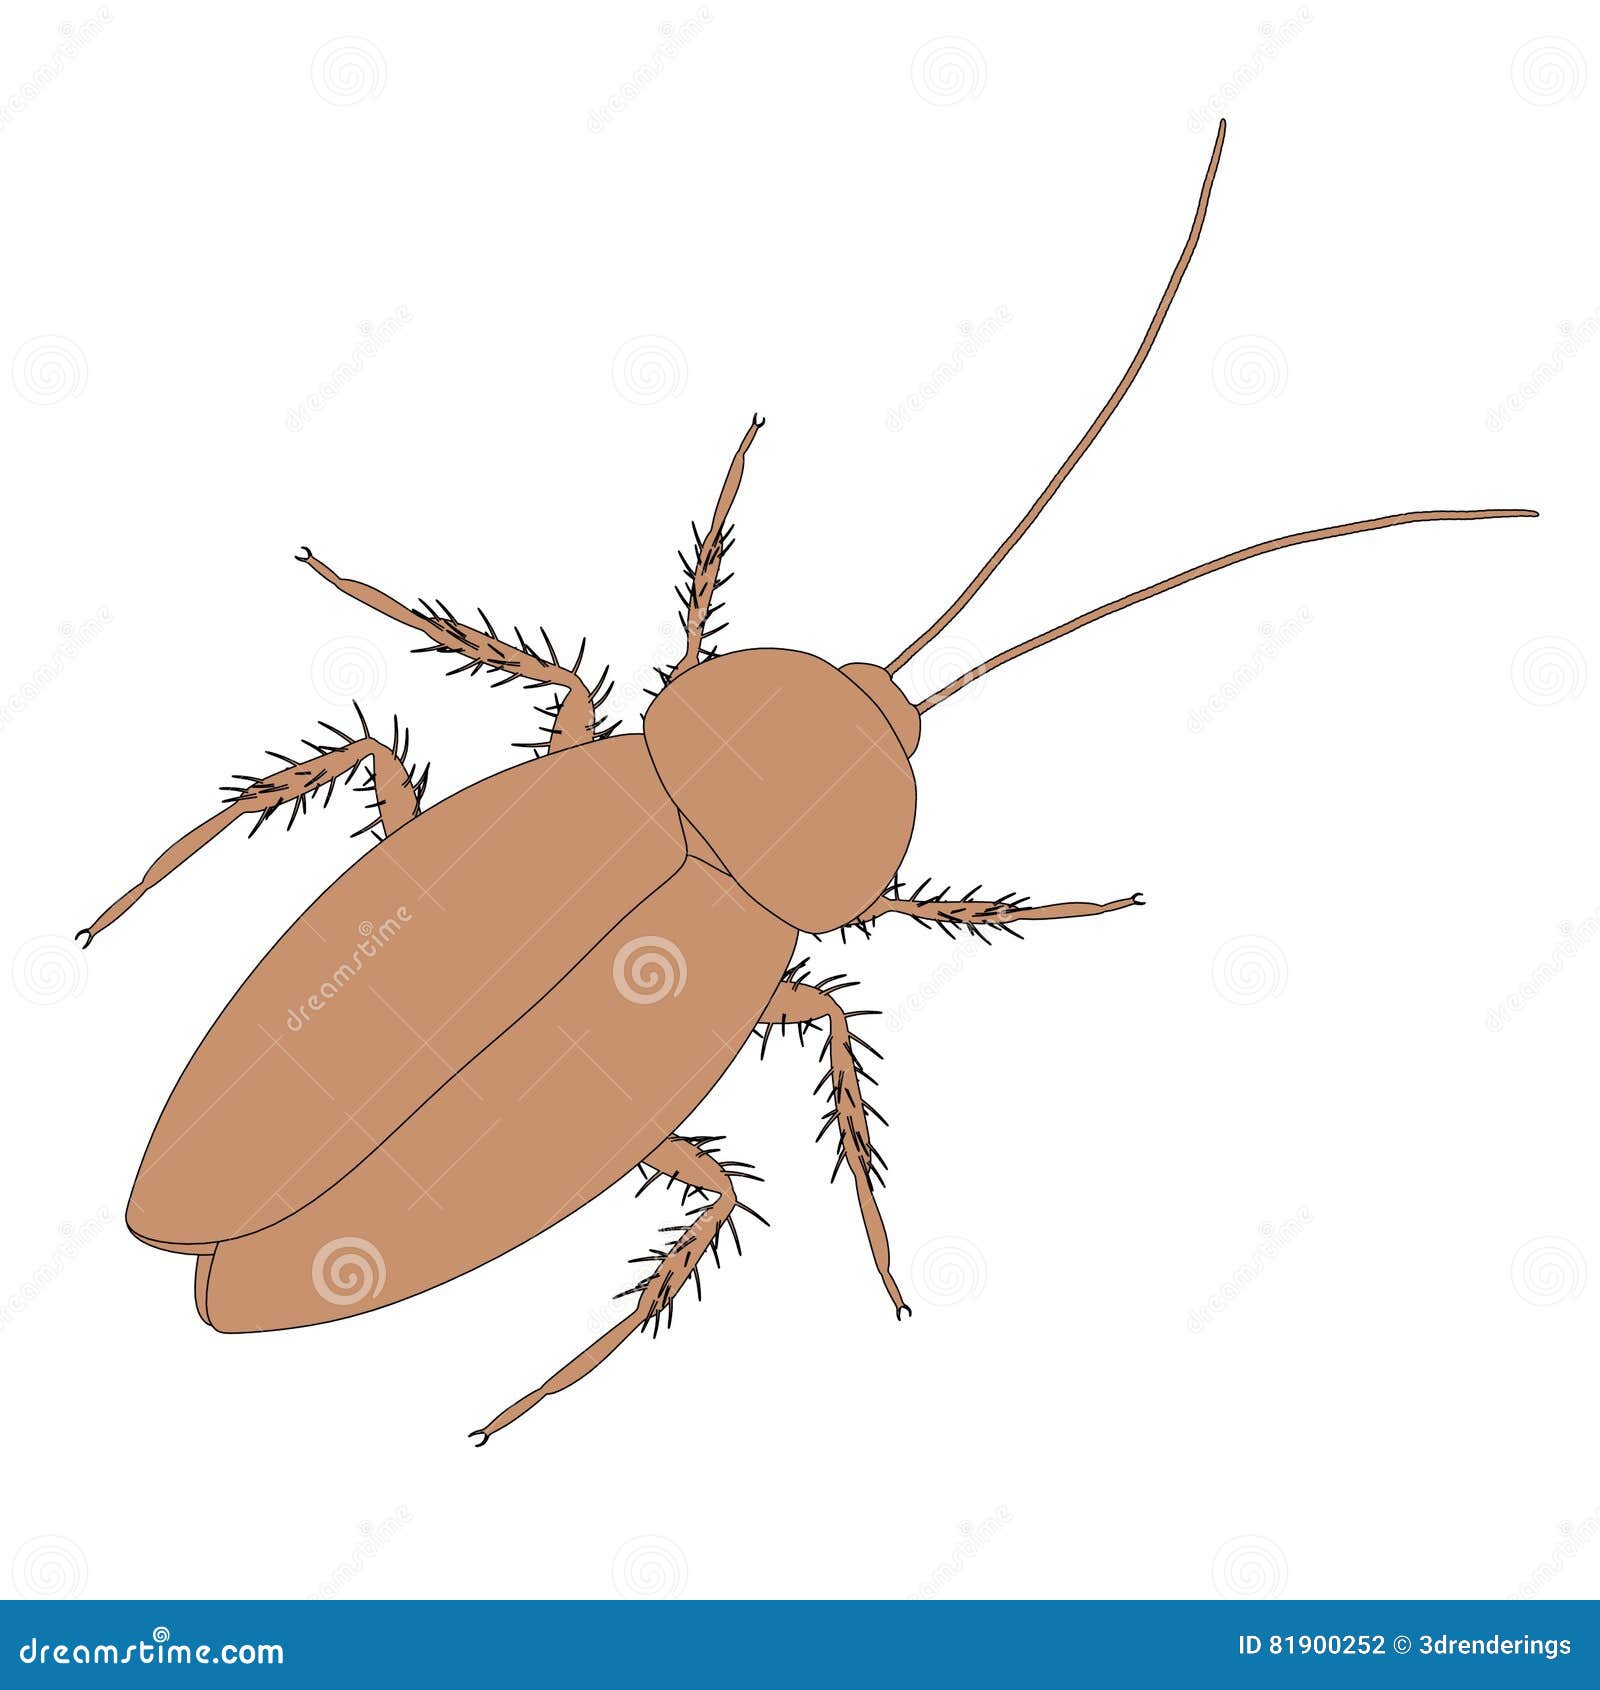 Cockroach stock illustration. Illustration of home, insect - 81900252